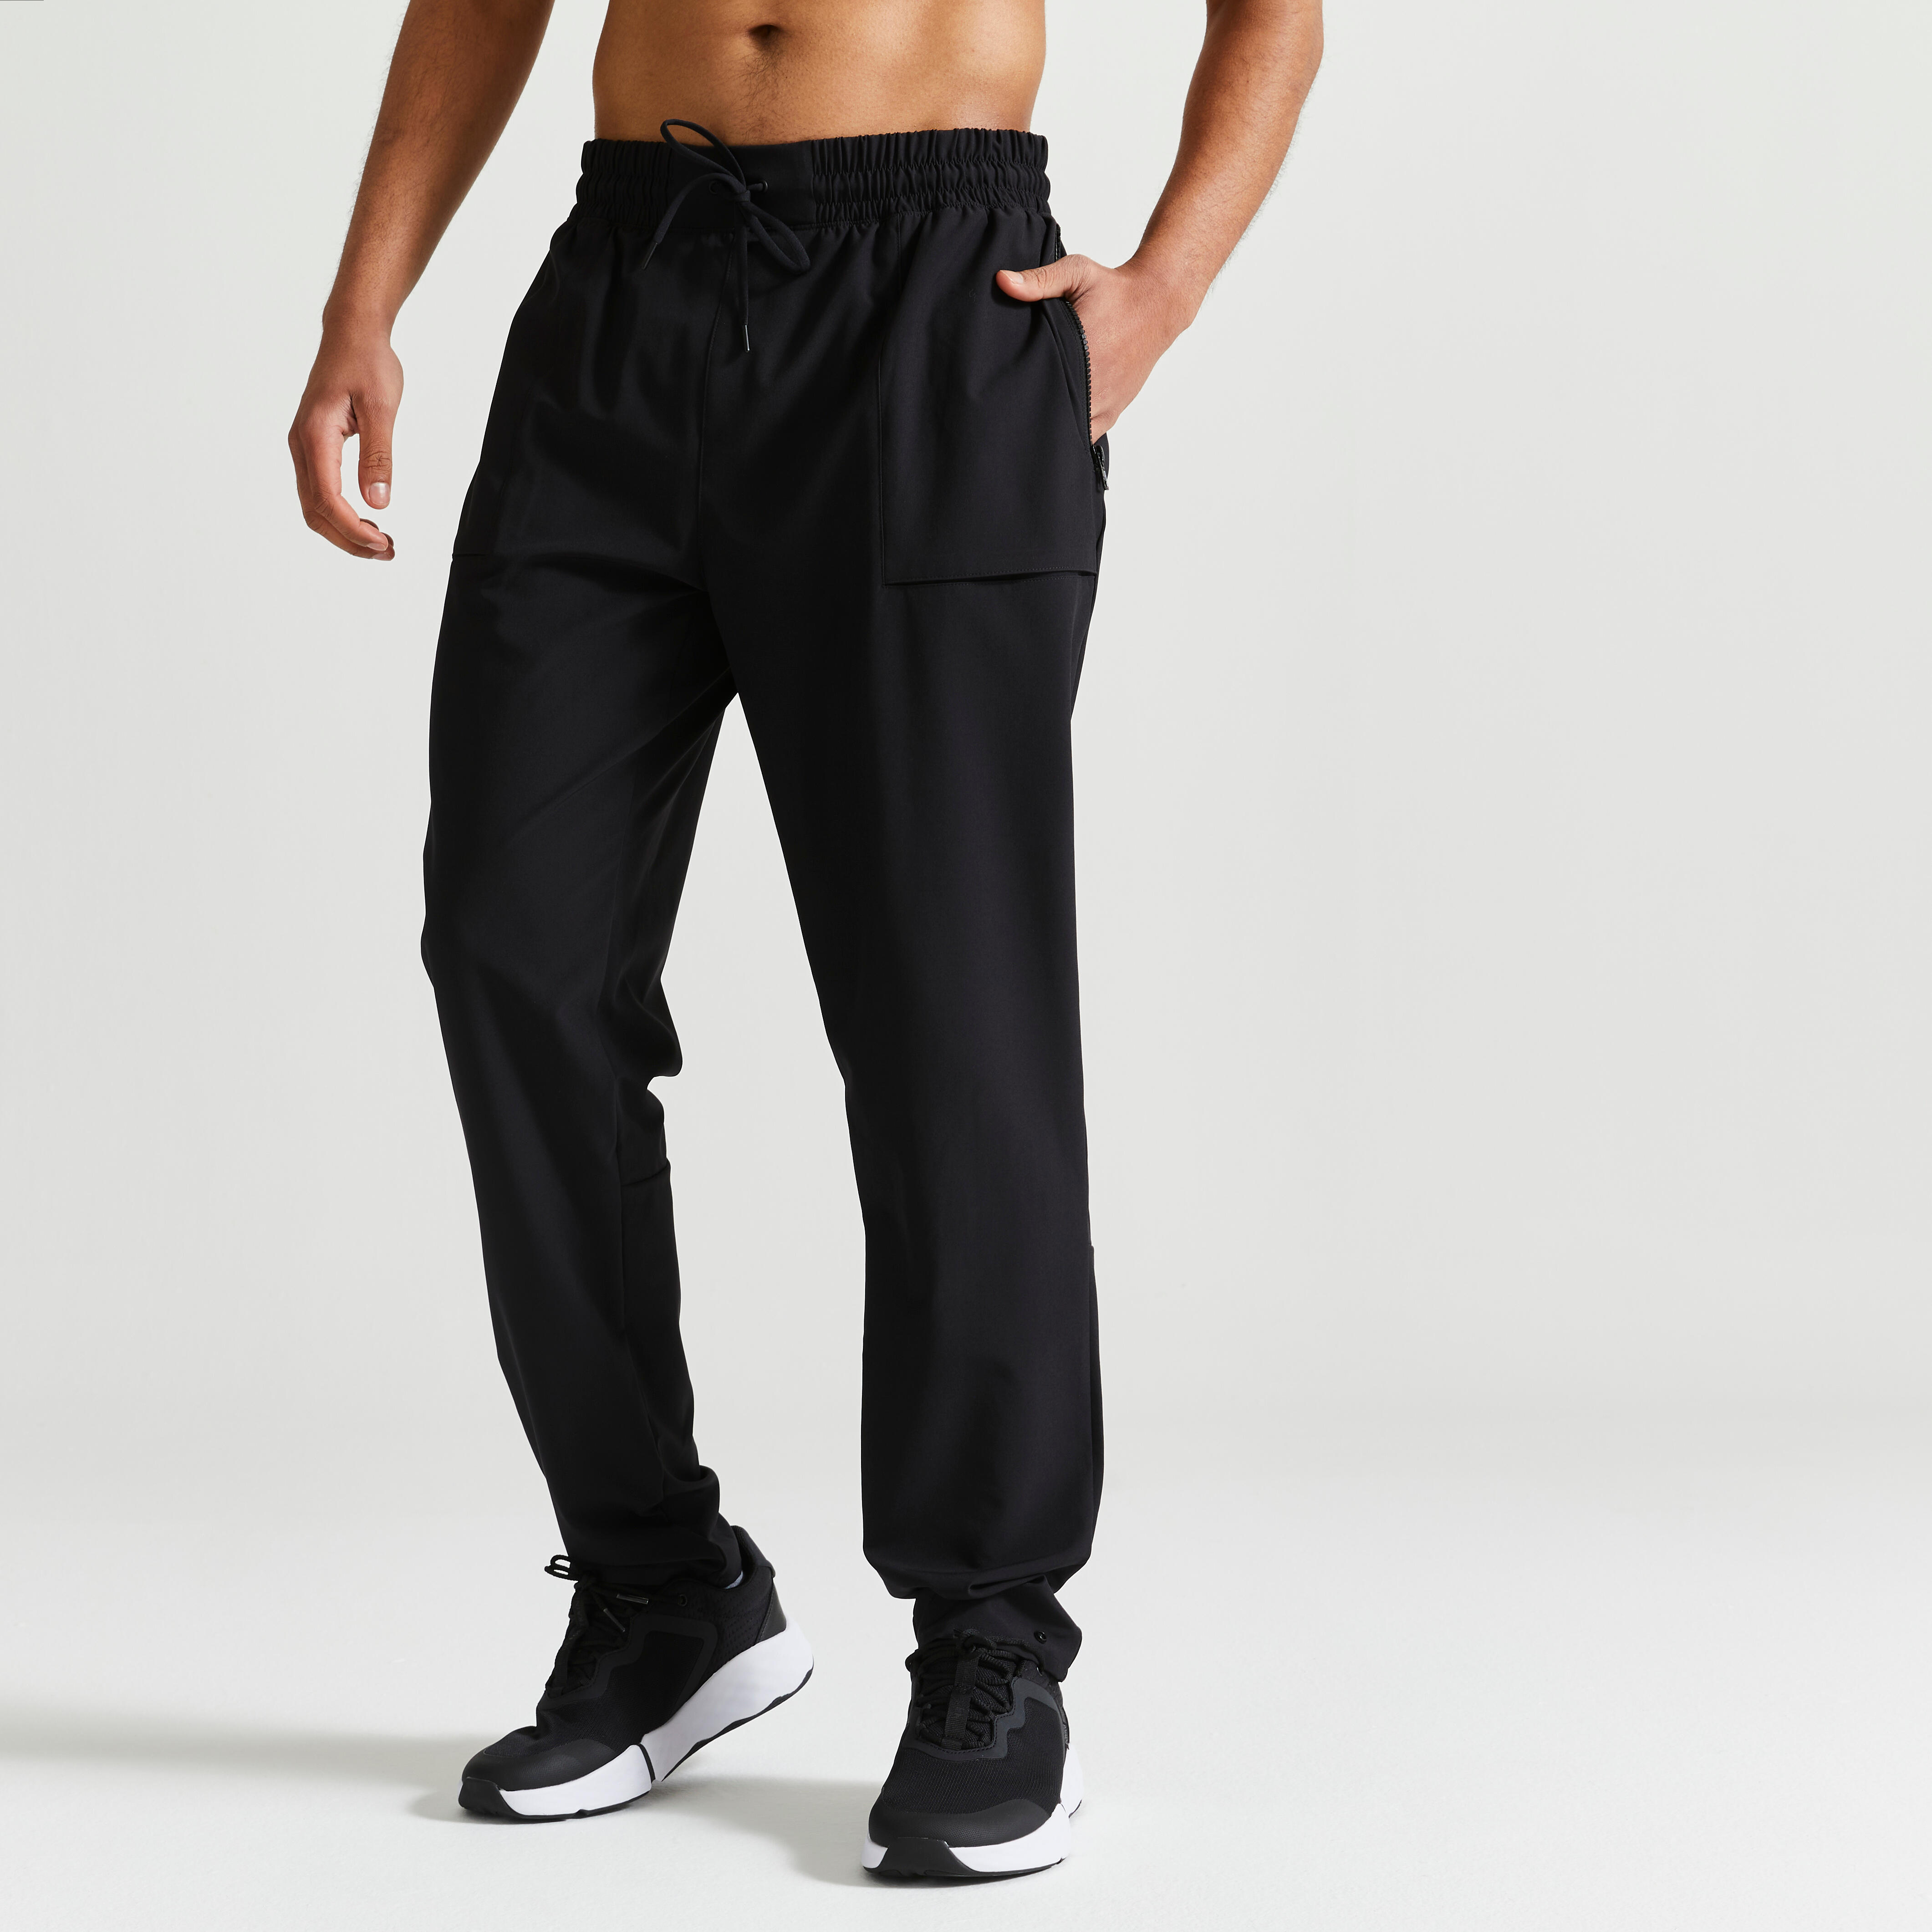 Buy Black Trousers & Pants for Men by UNITED COLORS OF BENETTON Online |  Ajio.com